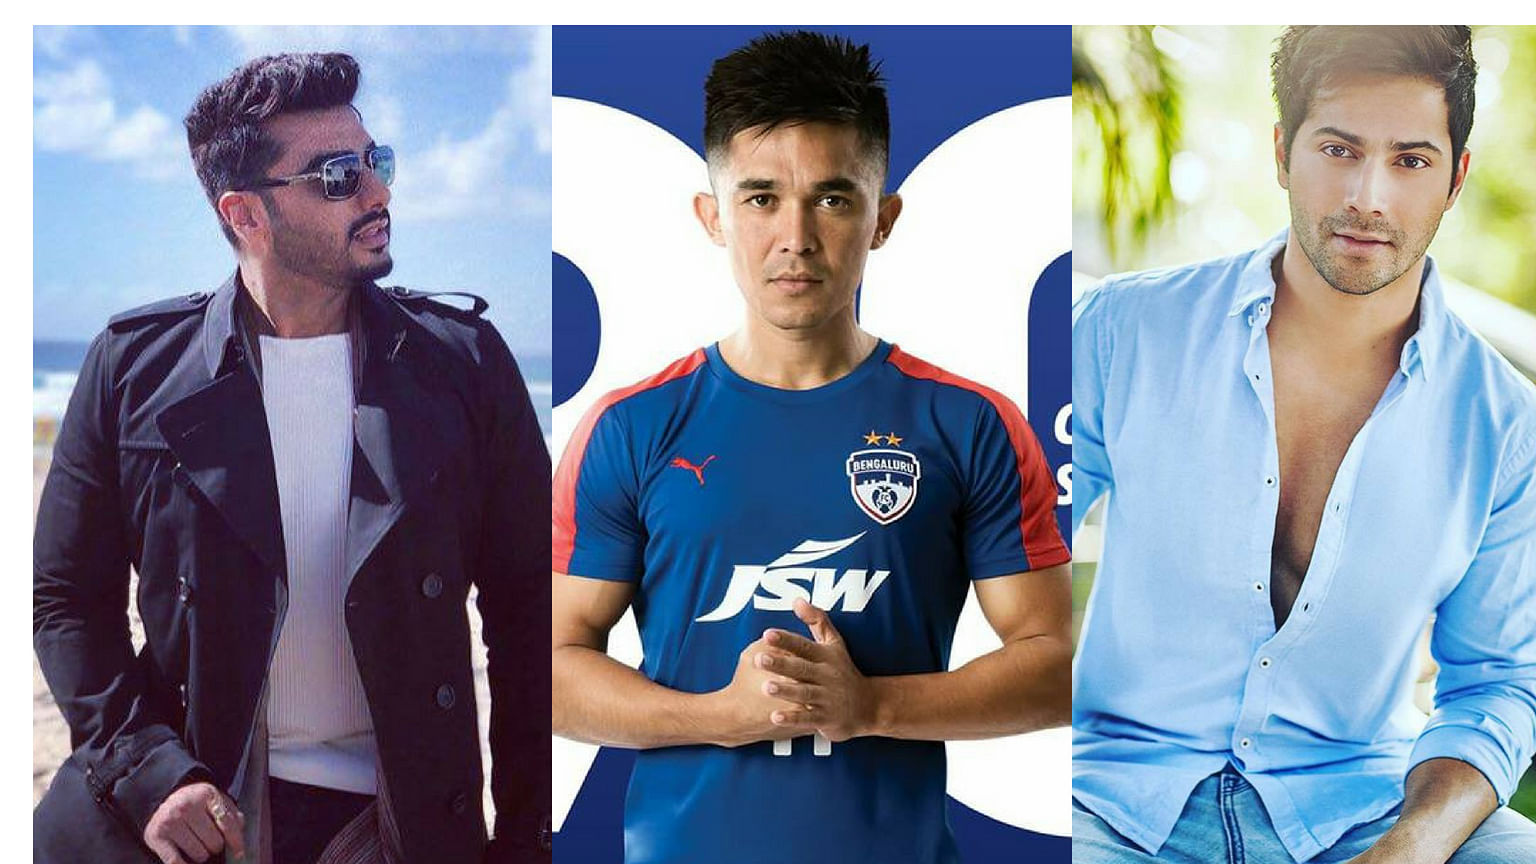 Bollywood celebrities like  Arjun Kapoor and Varun Dhawan have celebrated India’s victory over Kenya at the 2018 International Cup on Twitter.